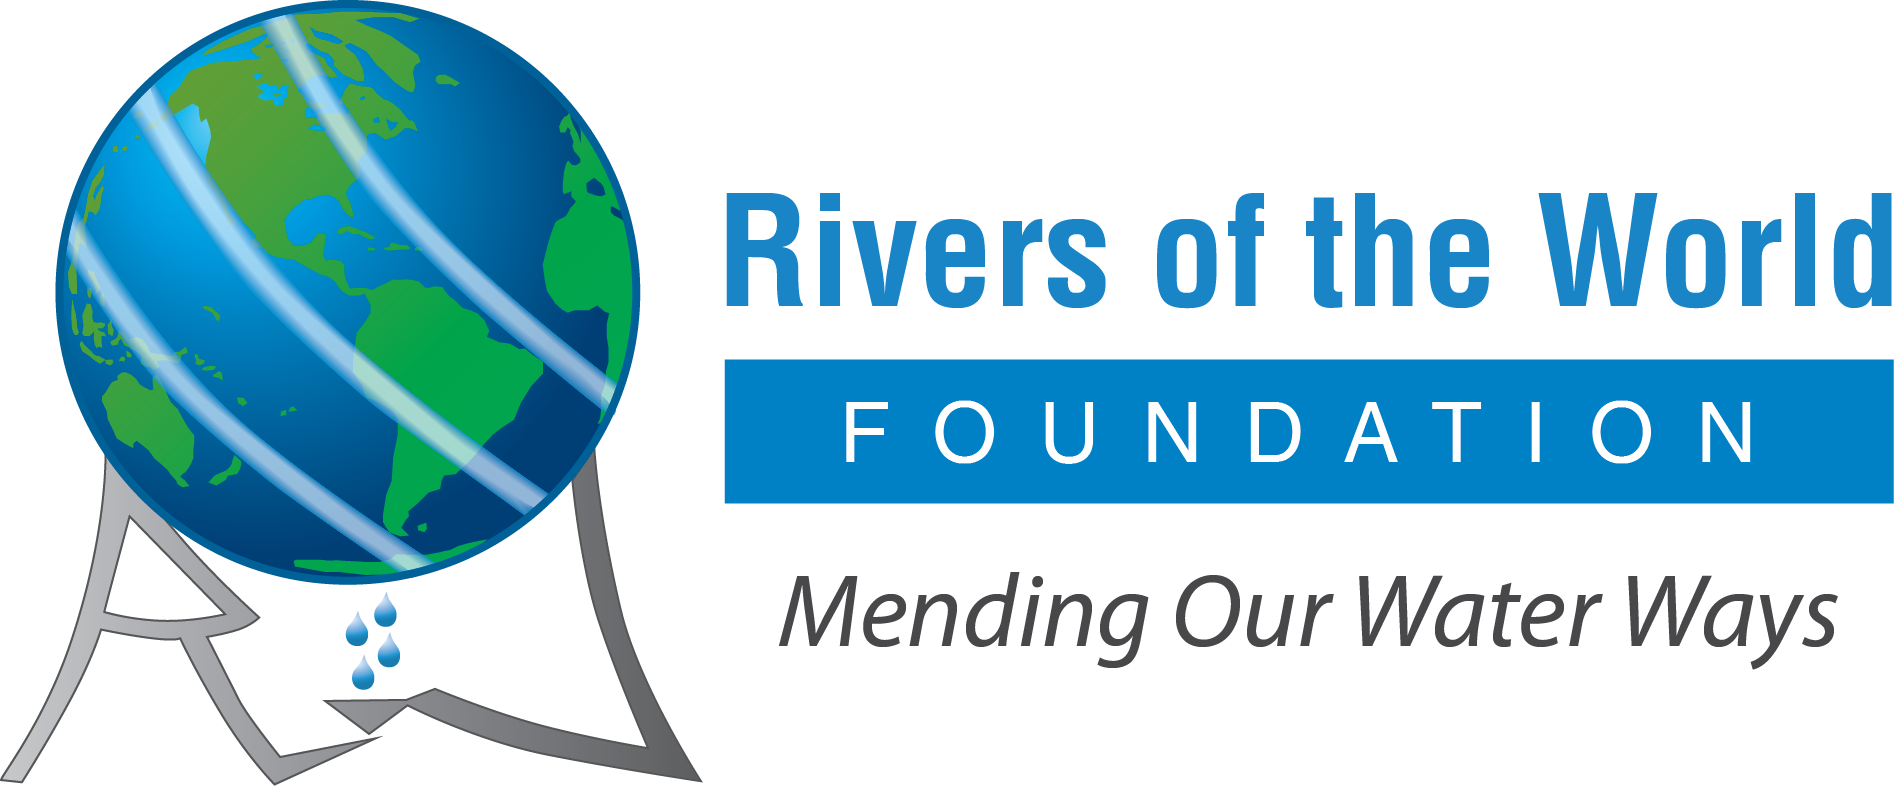 Rivers of the World Foundation - Welcome